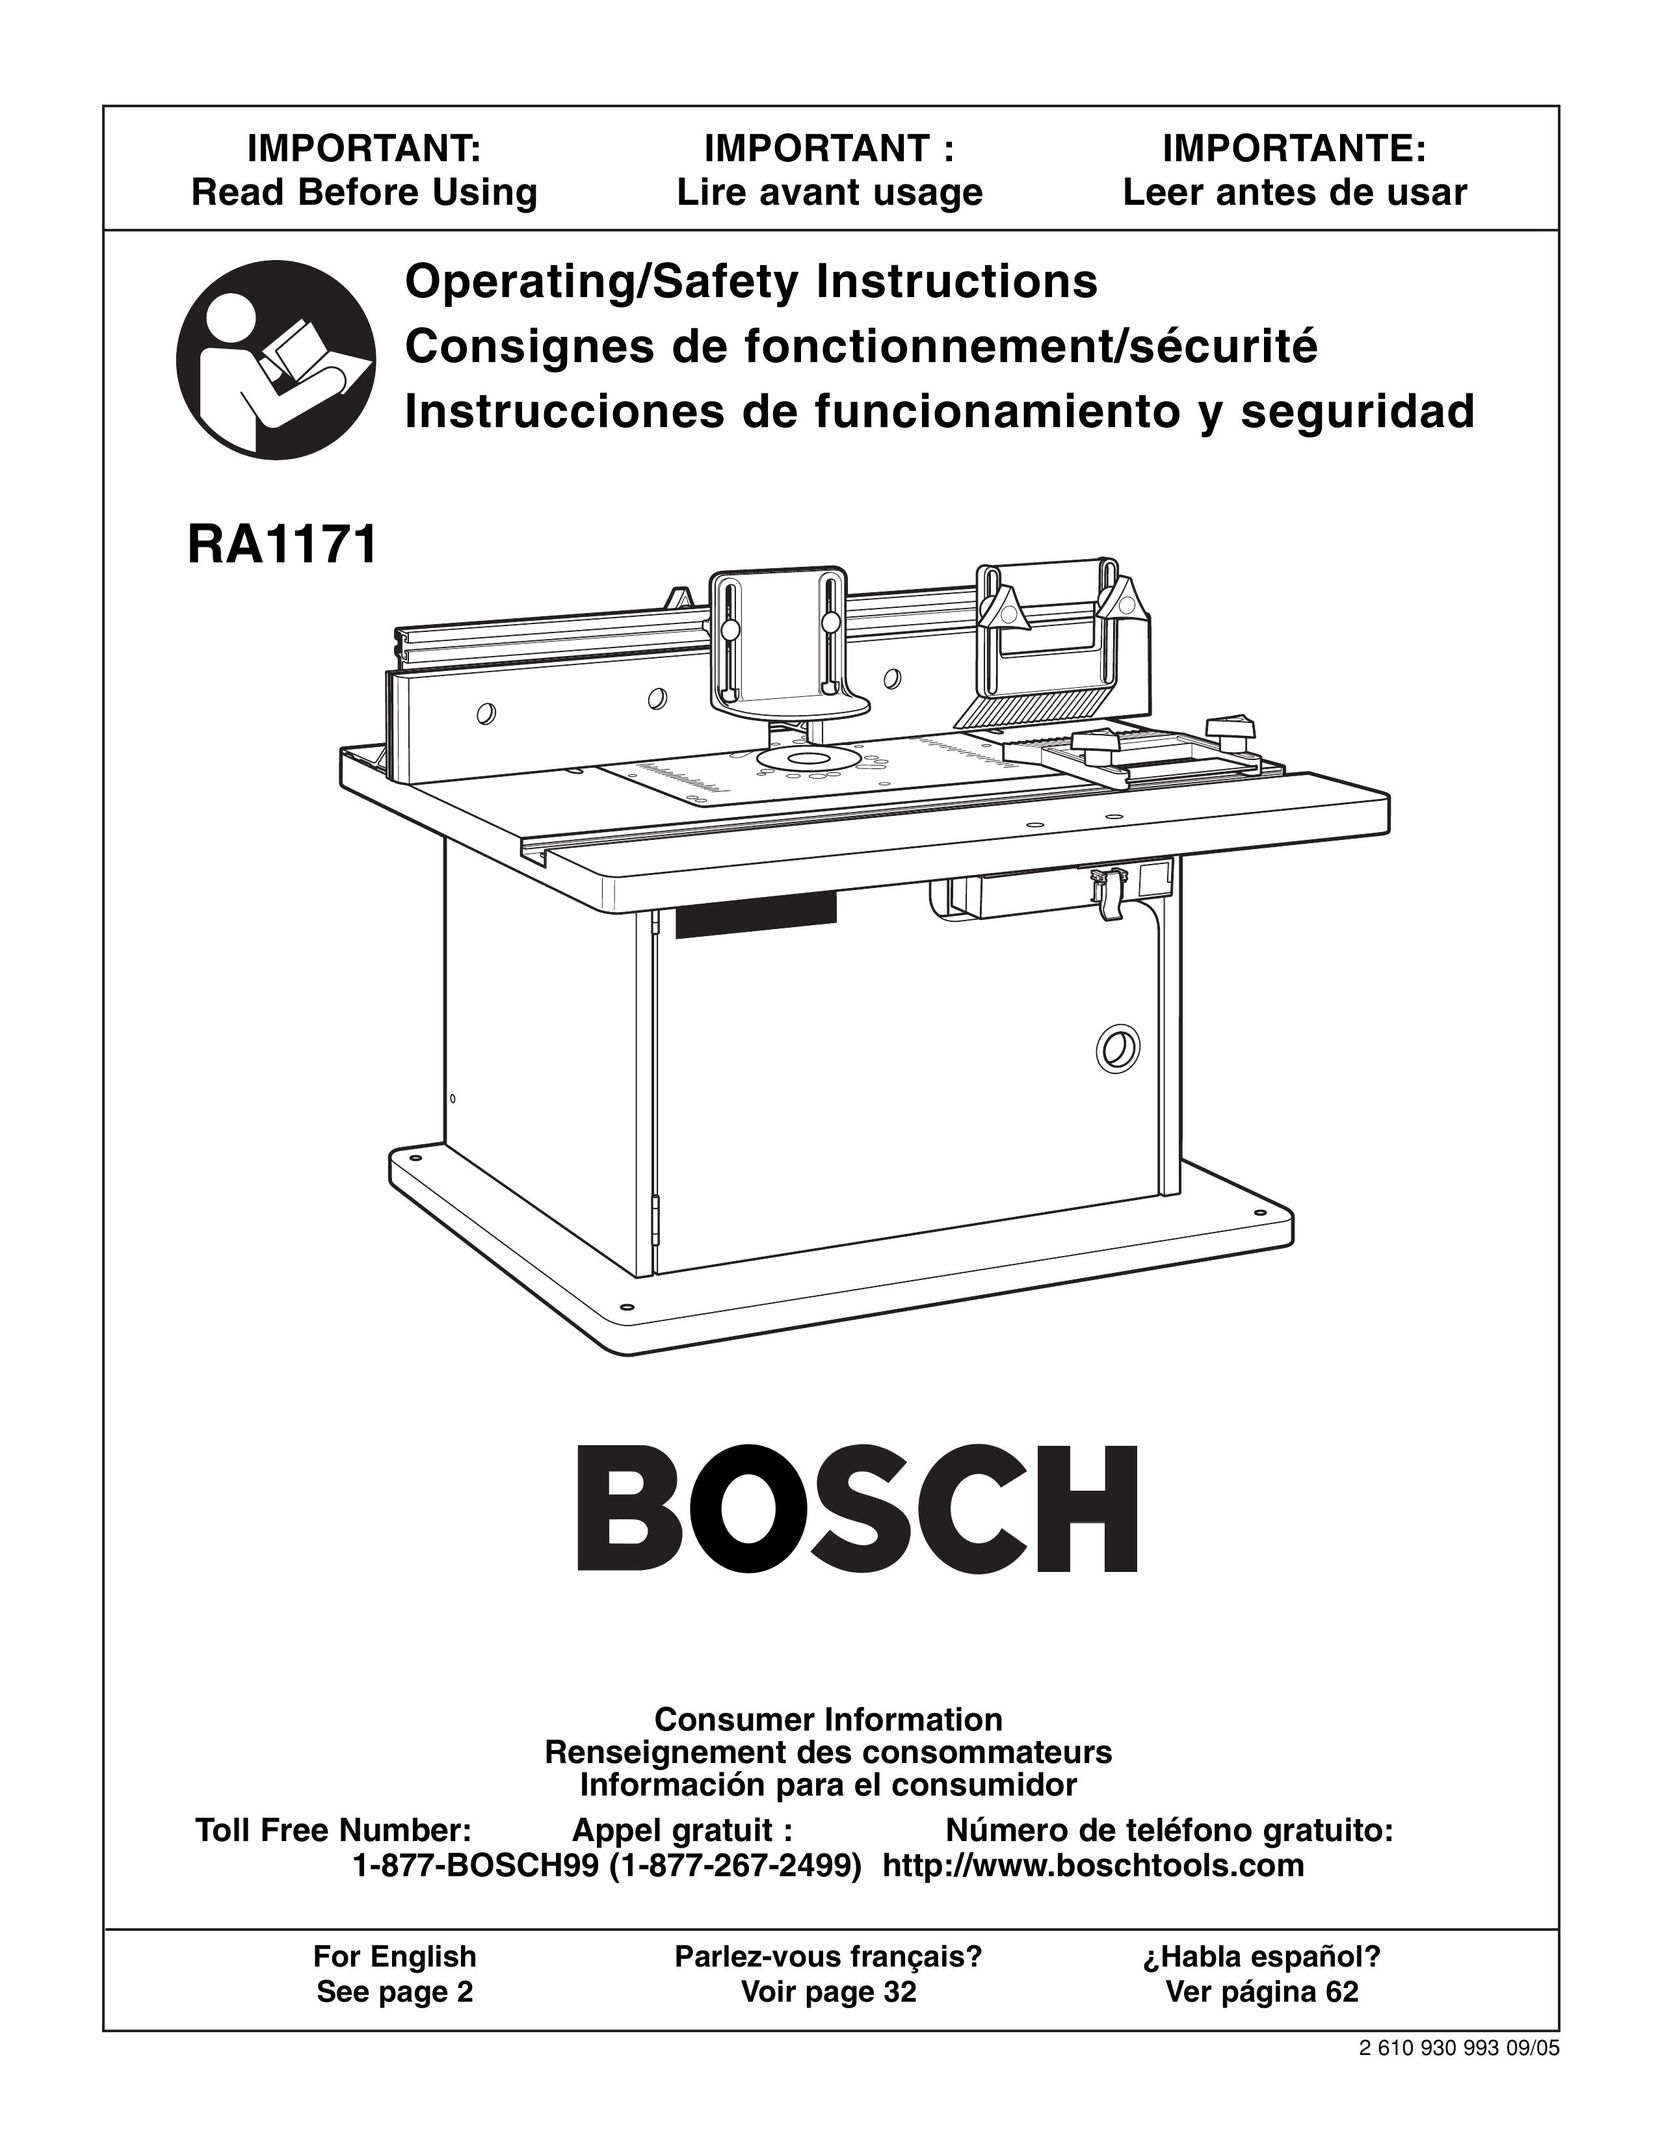 Bosch Power Tools RA1171 Router User Manual